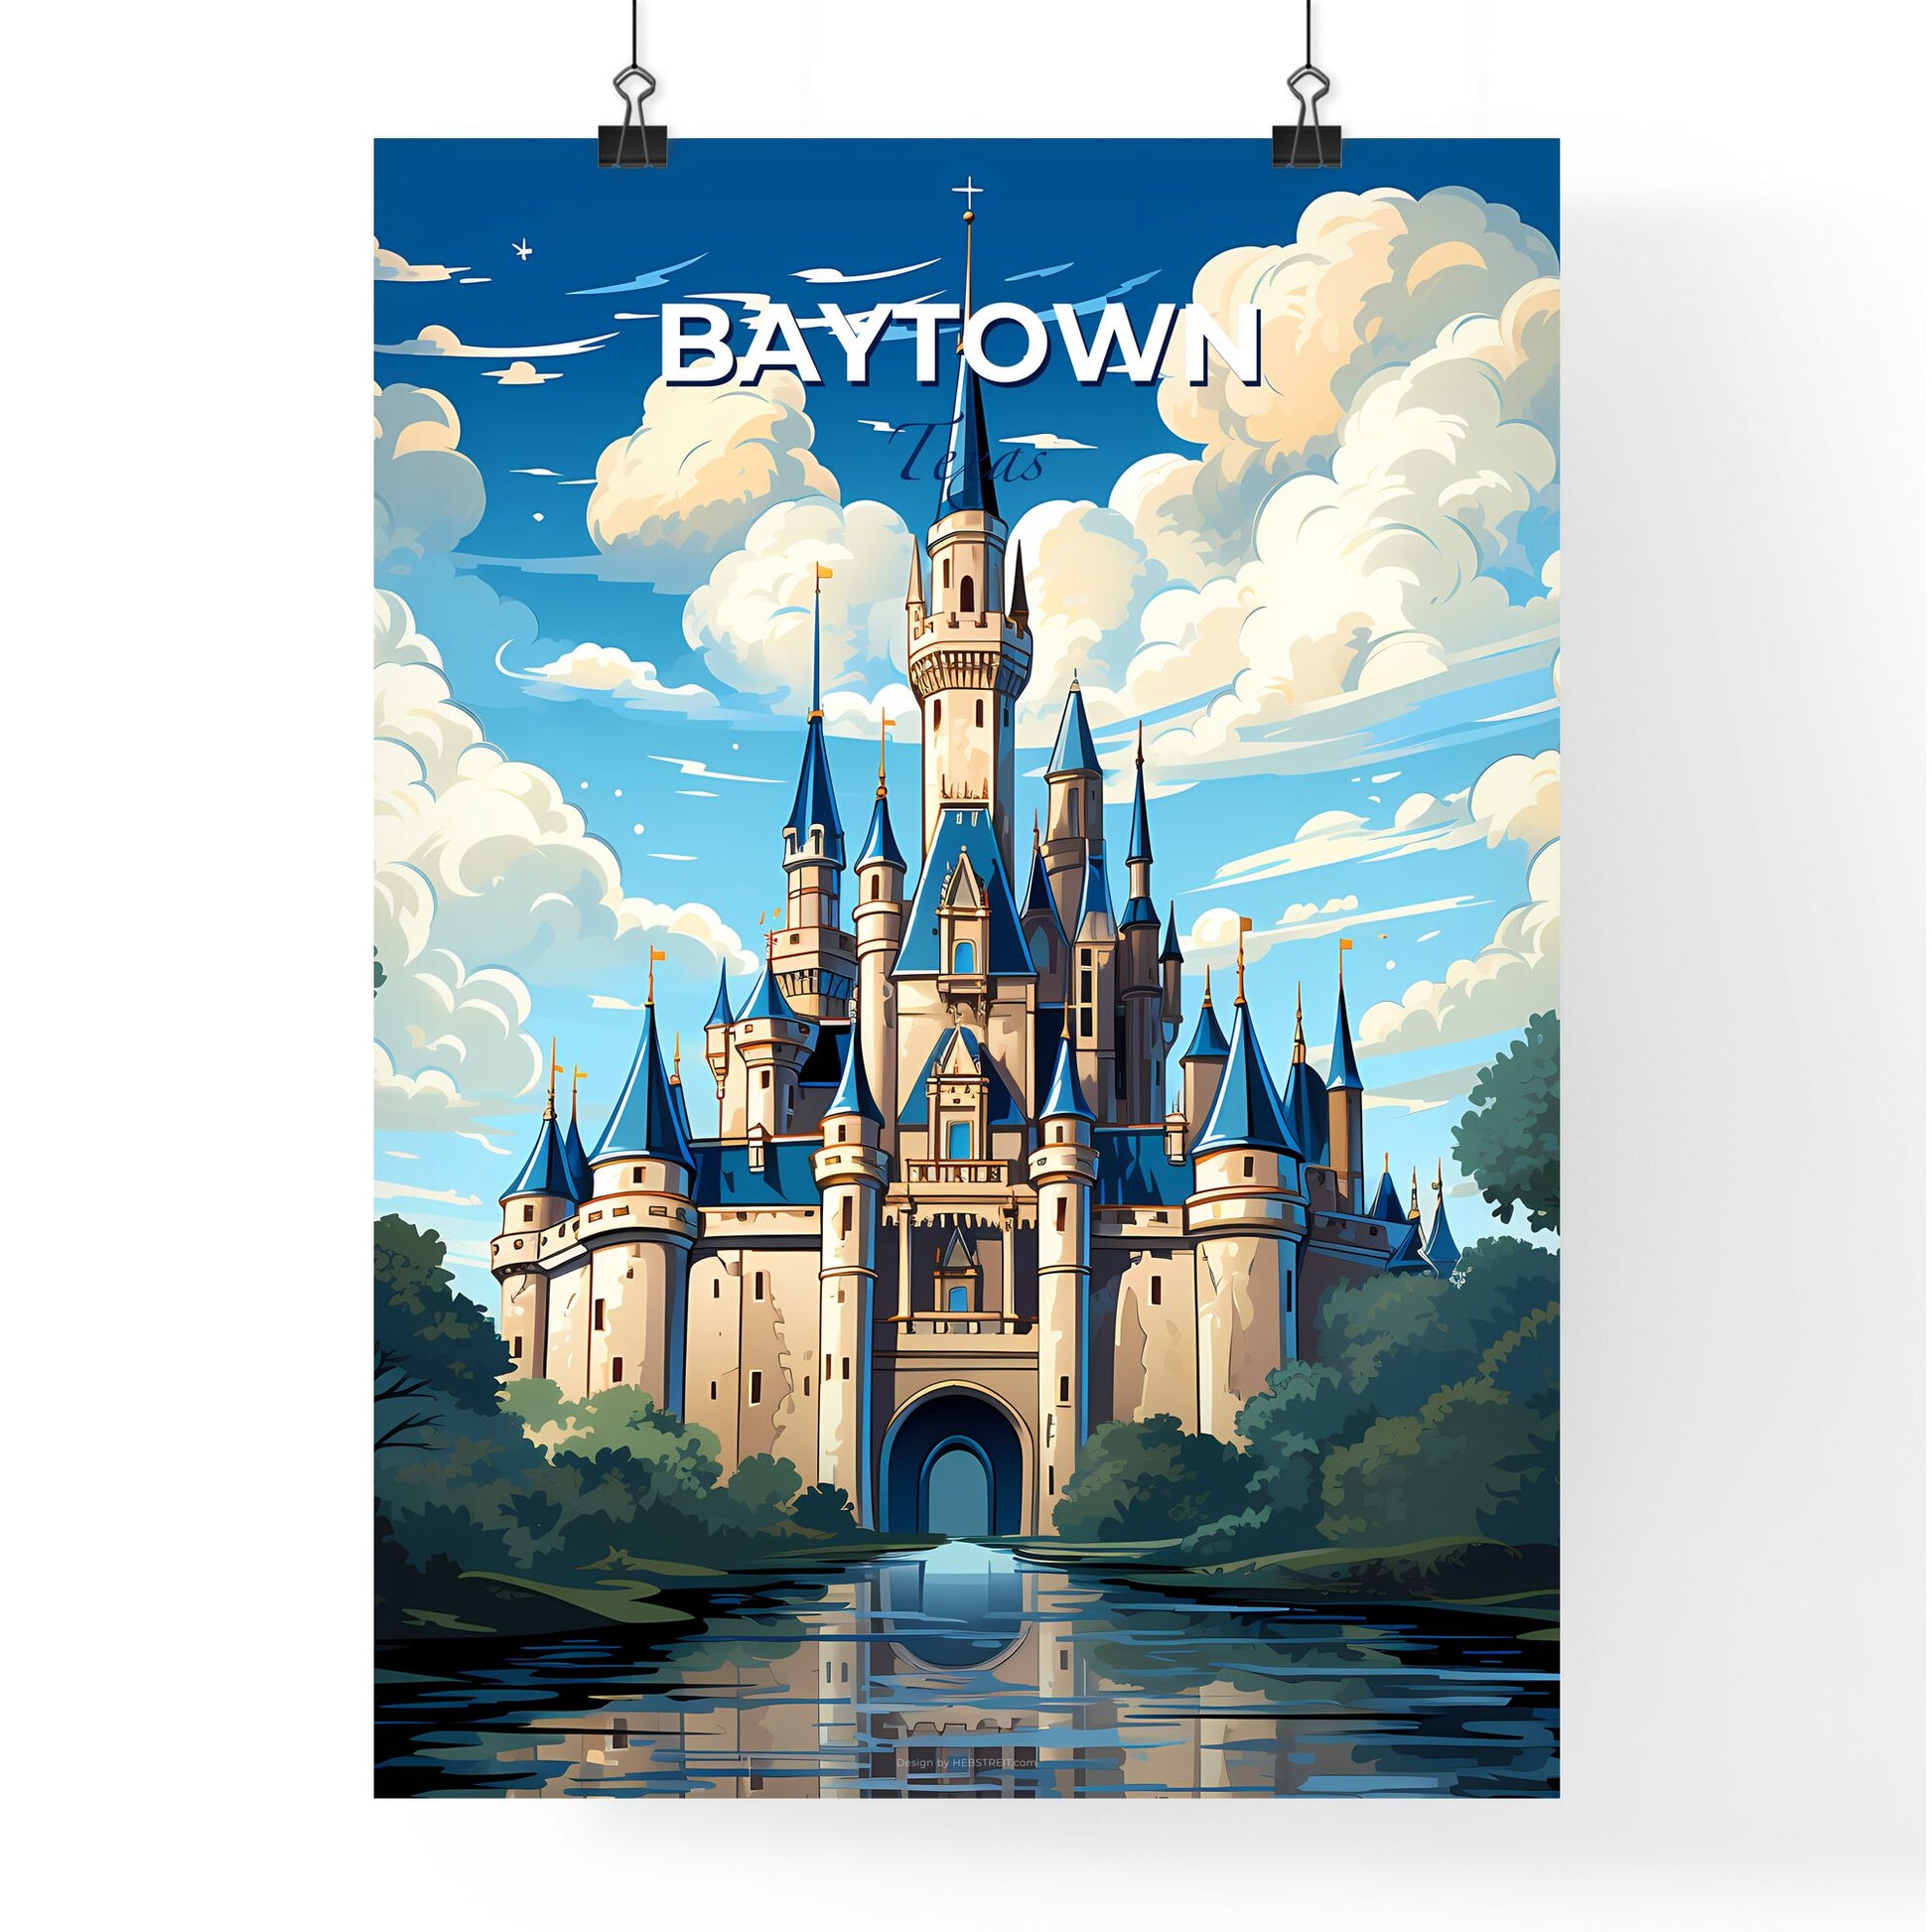 Baytown, Texas, A Poster of a castle with trees and clouds Default Title